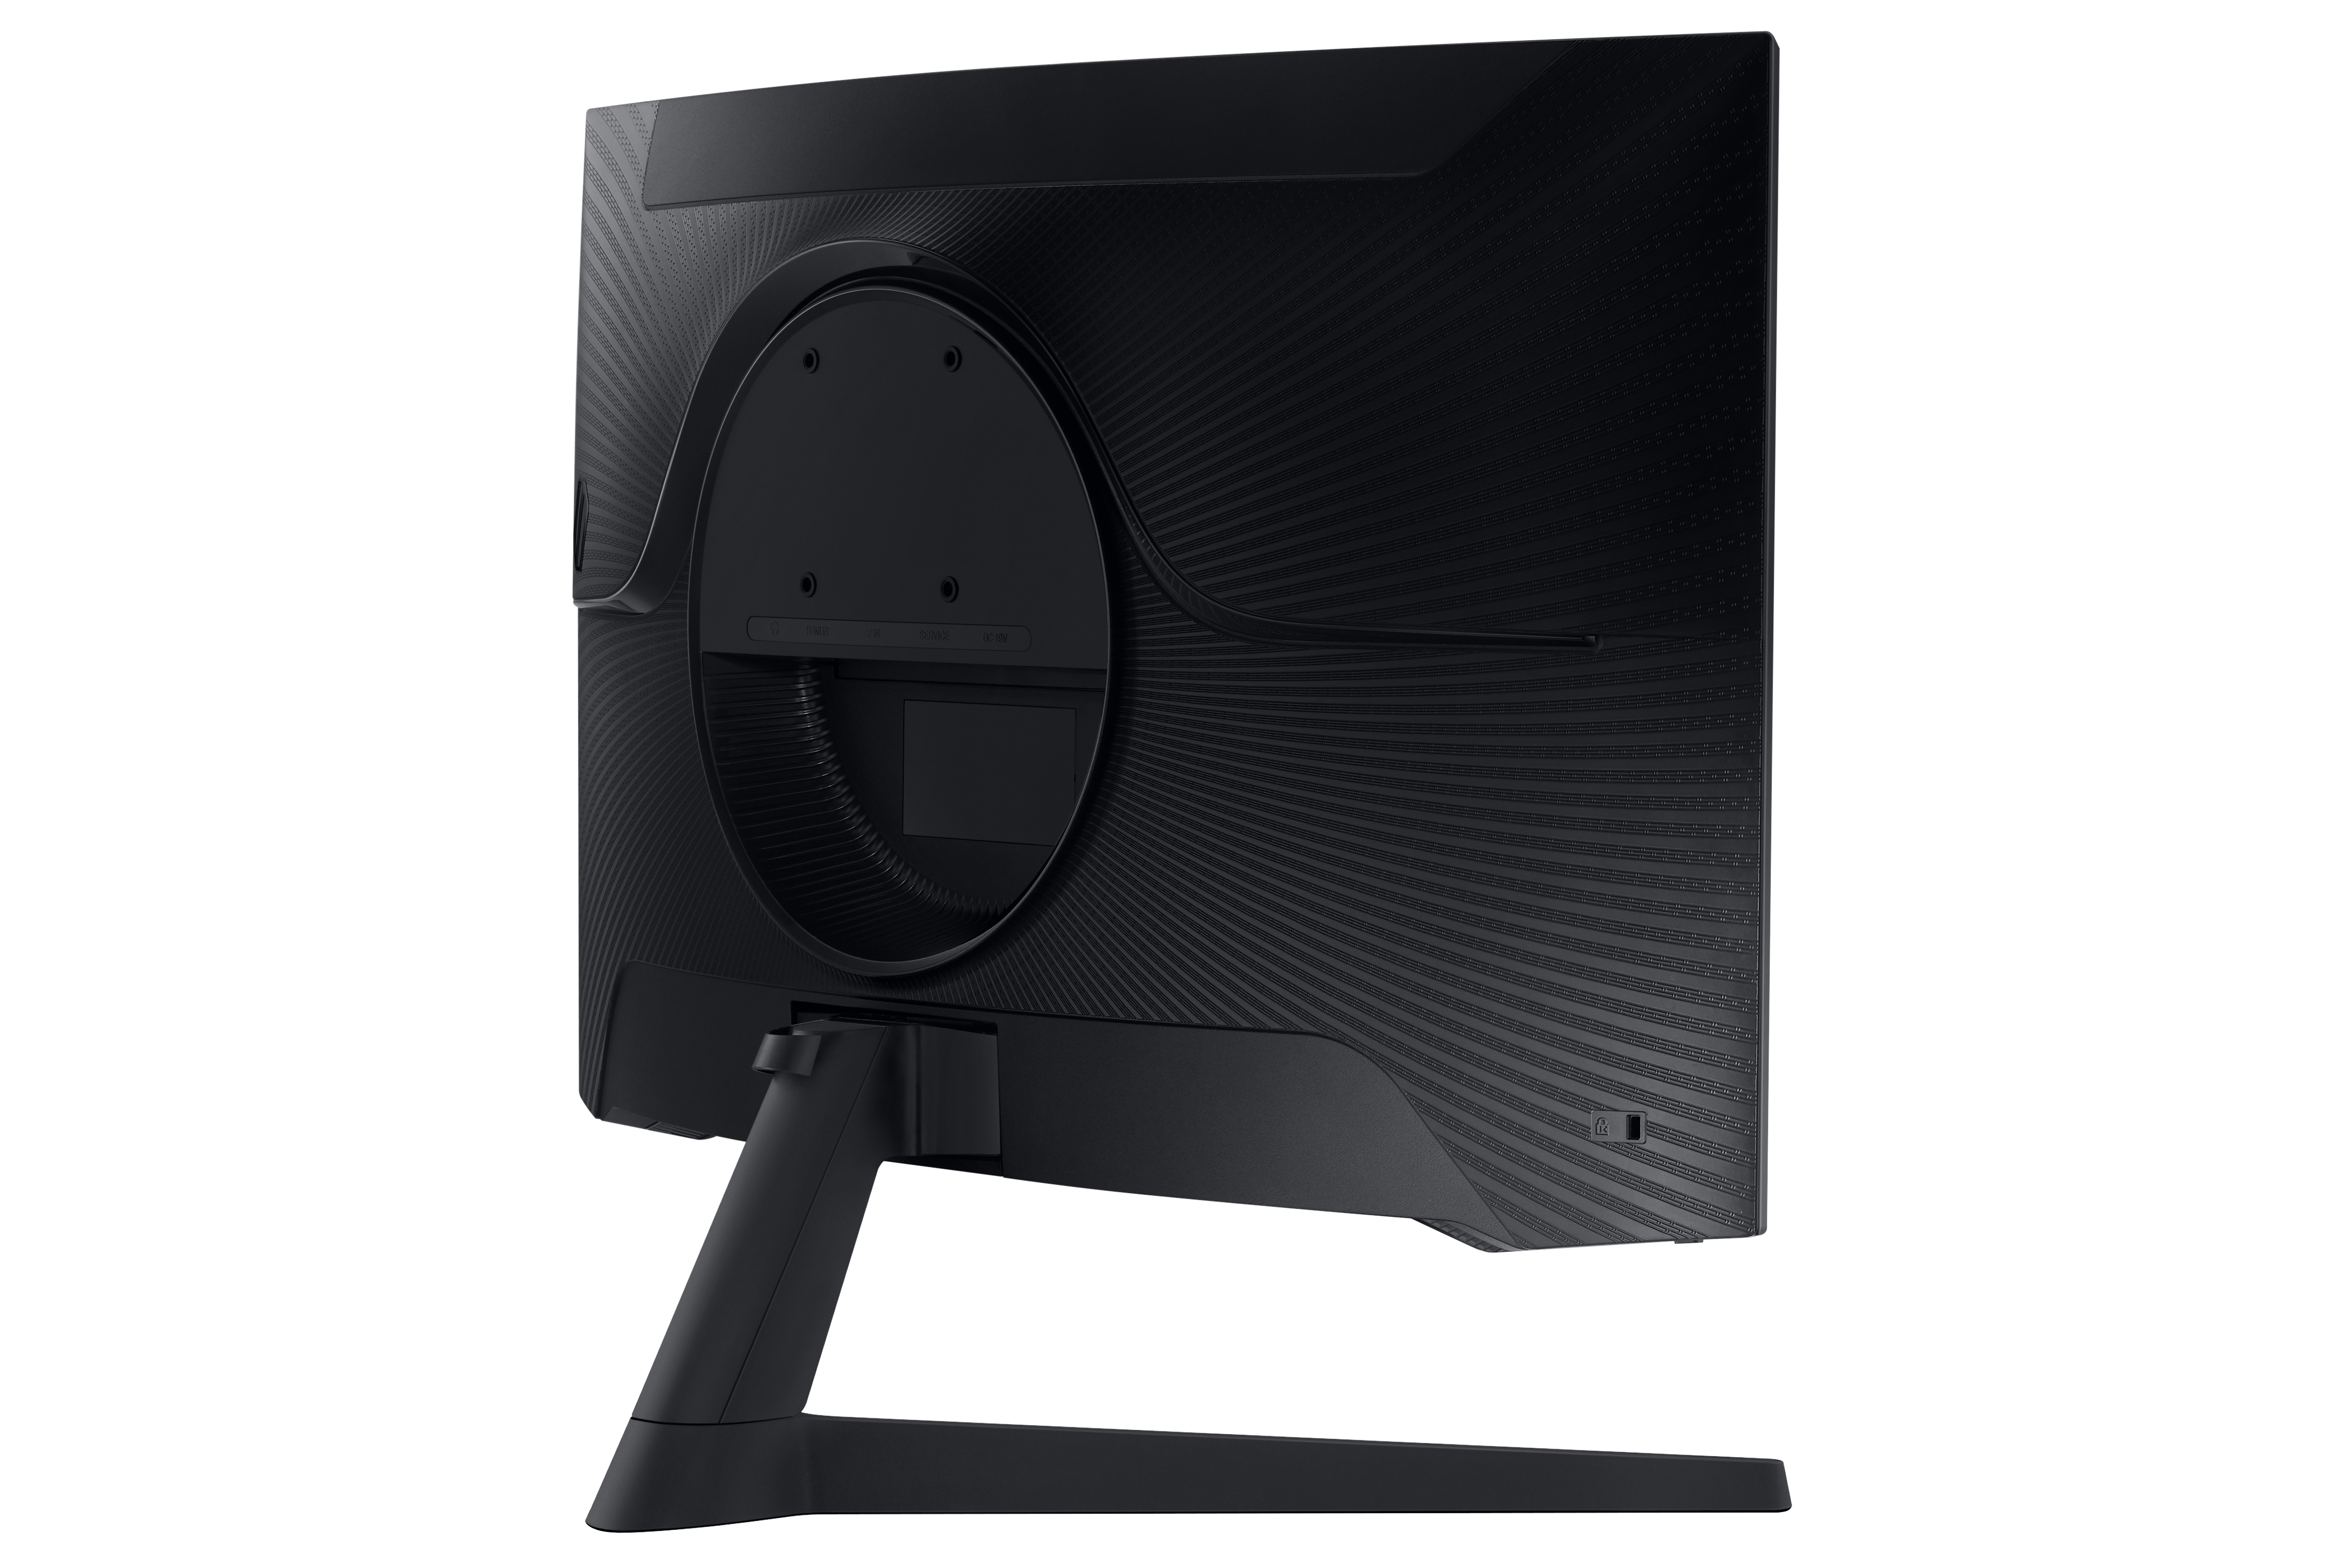 32 G5 Odyssey Gaming Monitor With 1000R Curved Screen - LC32G57TQWNXDC